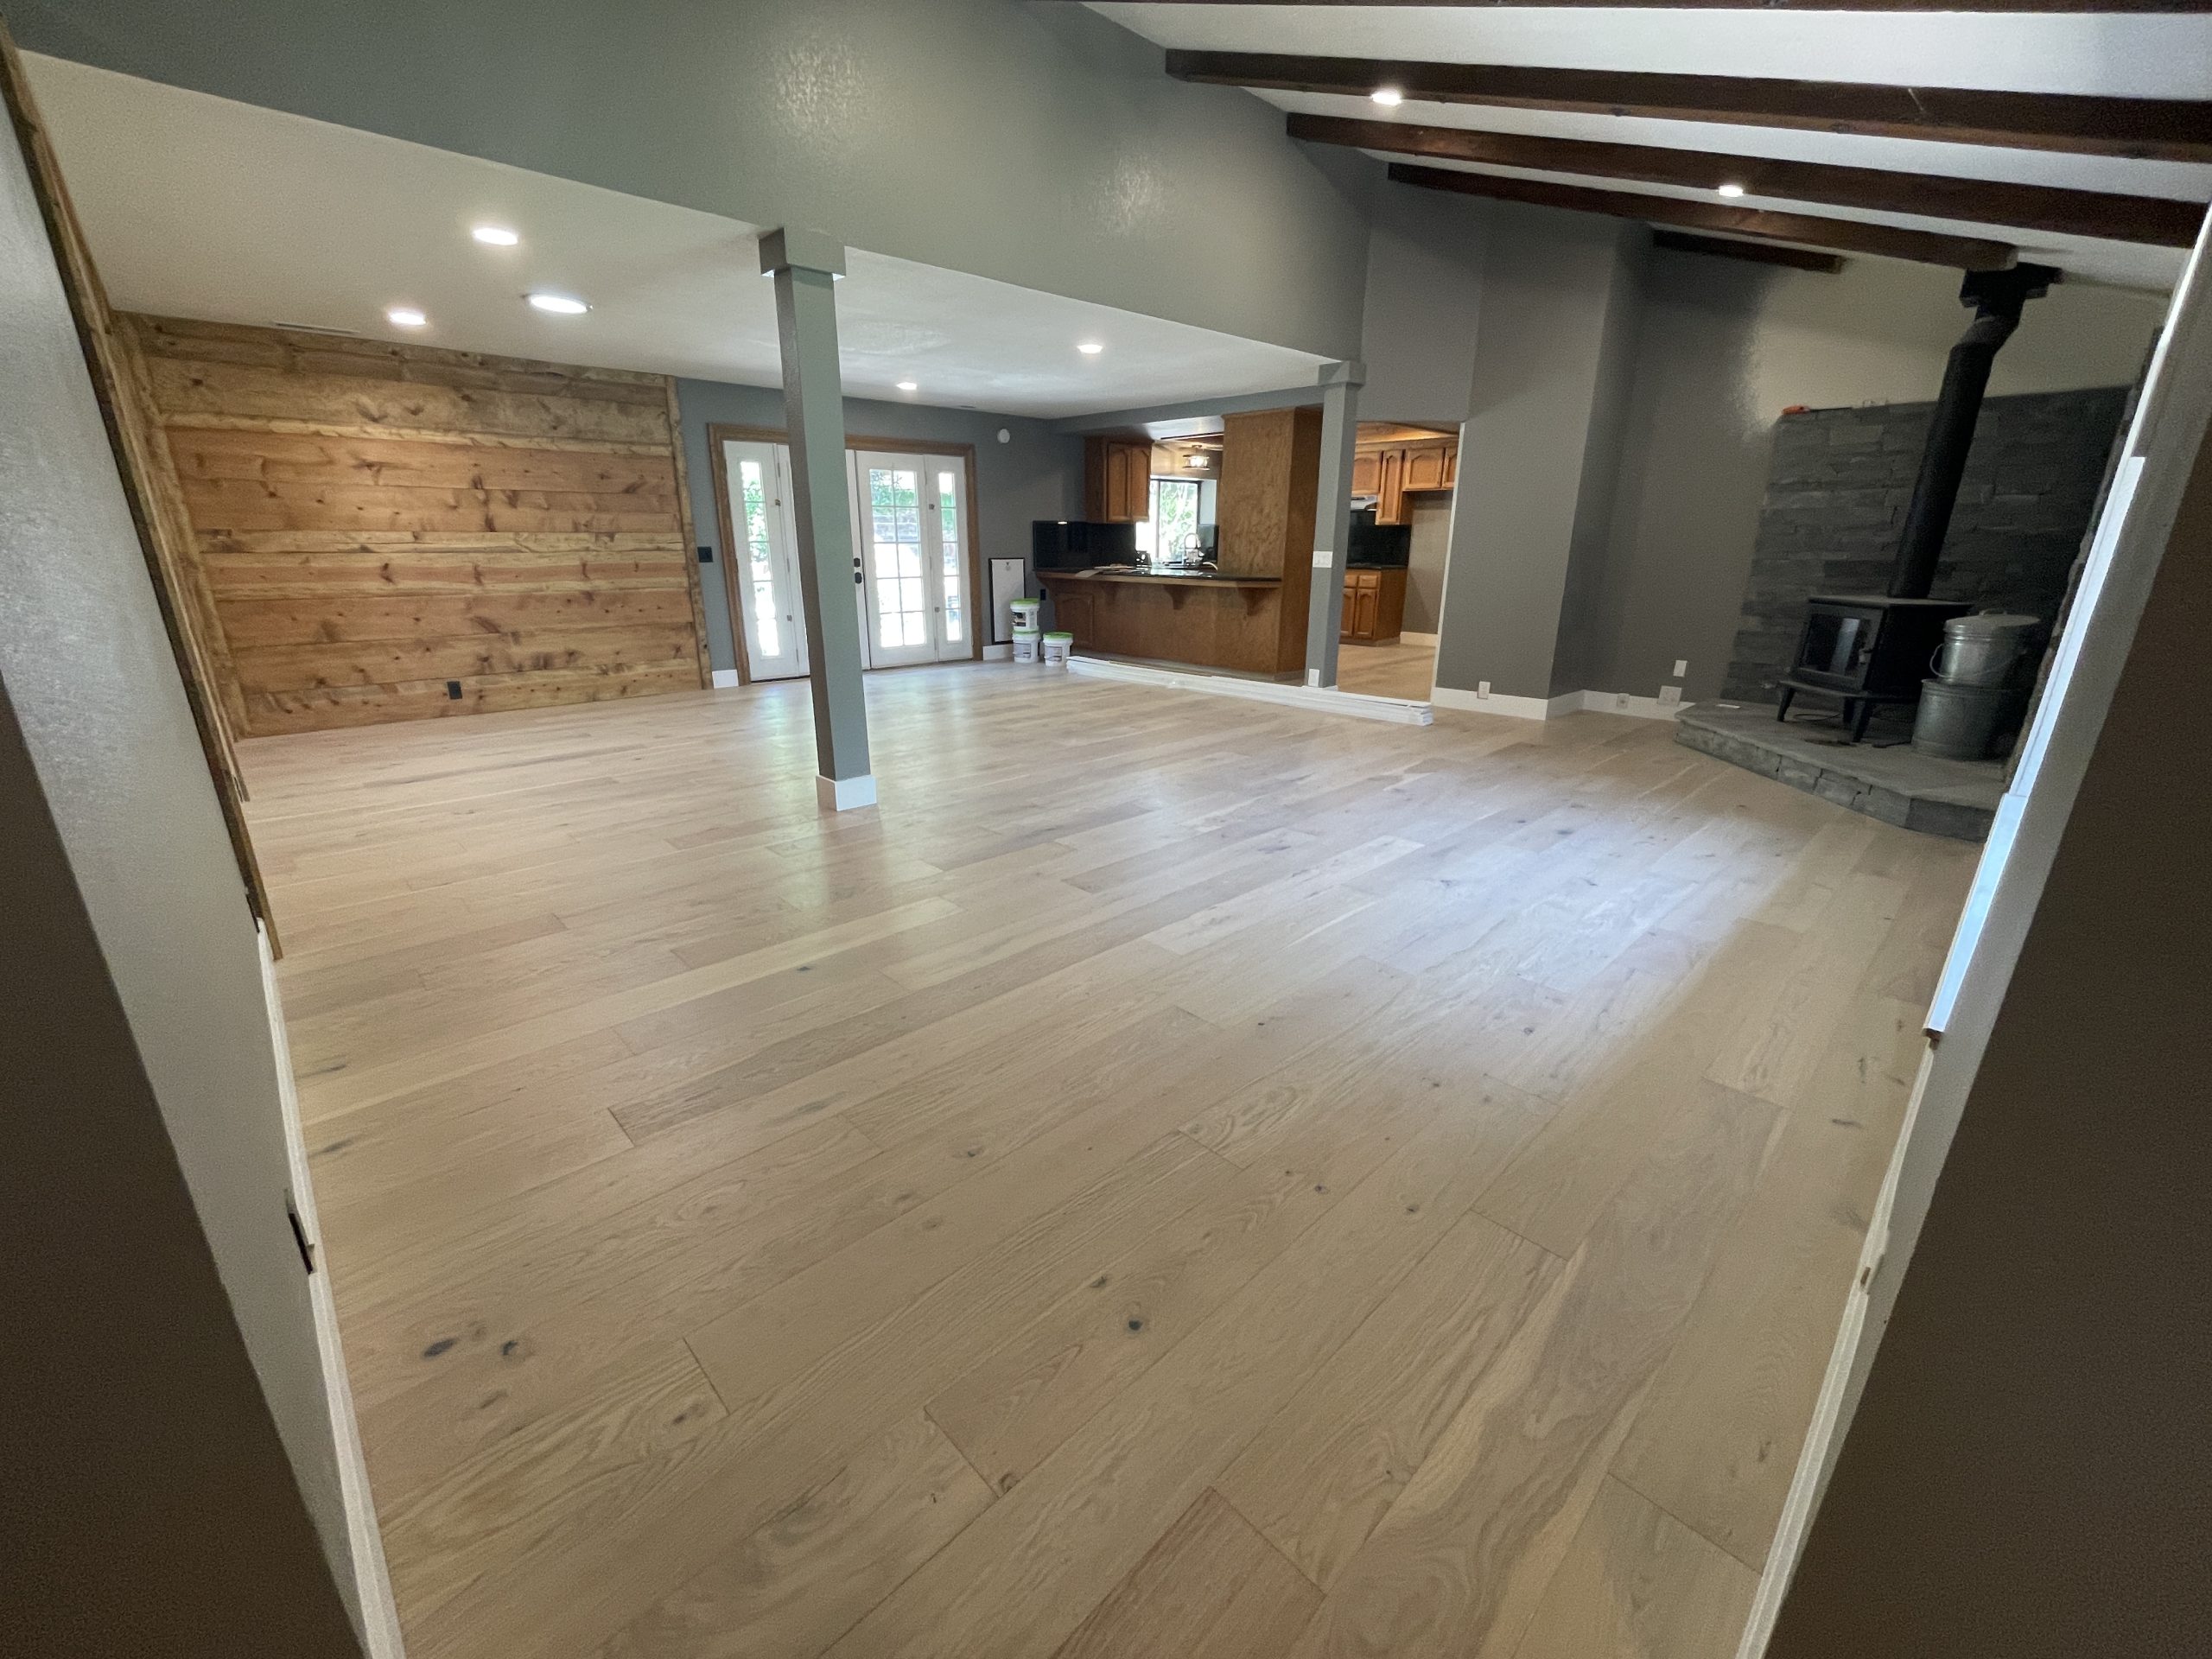 Home's hardwood flooring done in a large living room